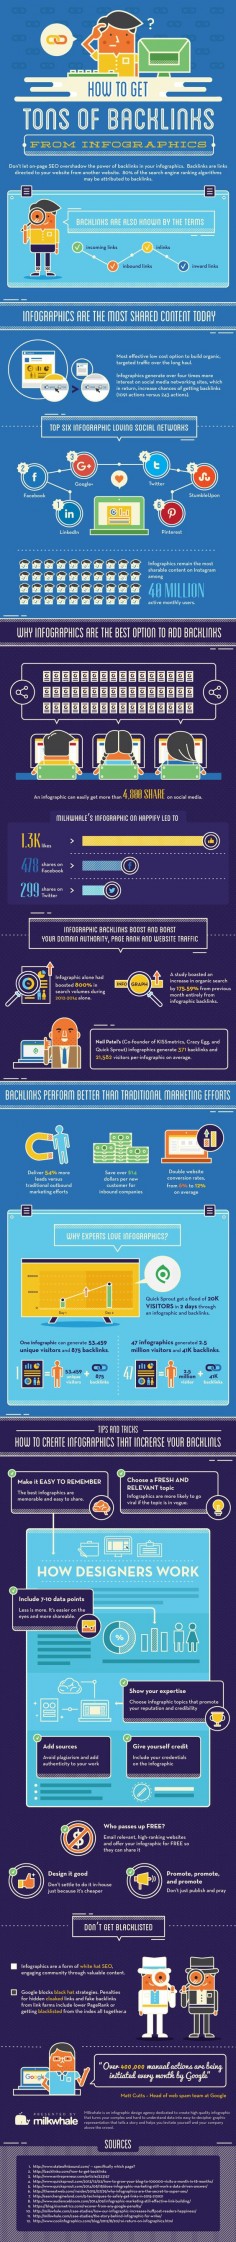 How To Get Tons Of Backlinks From Infographics - #infographic